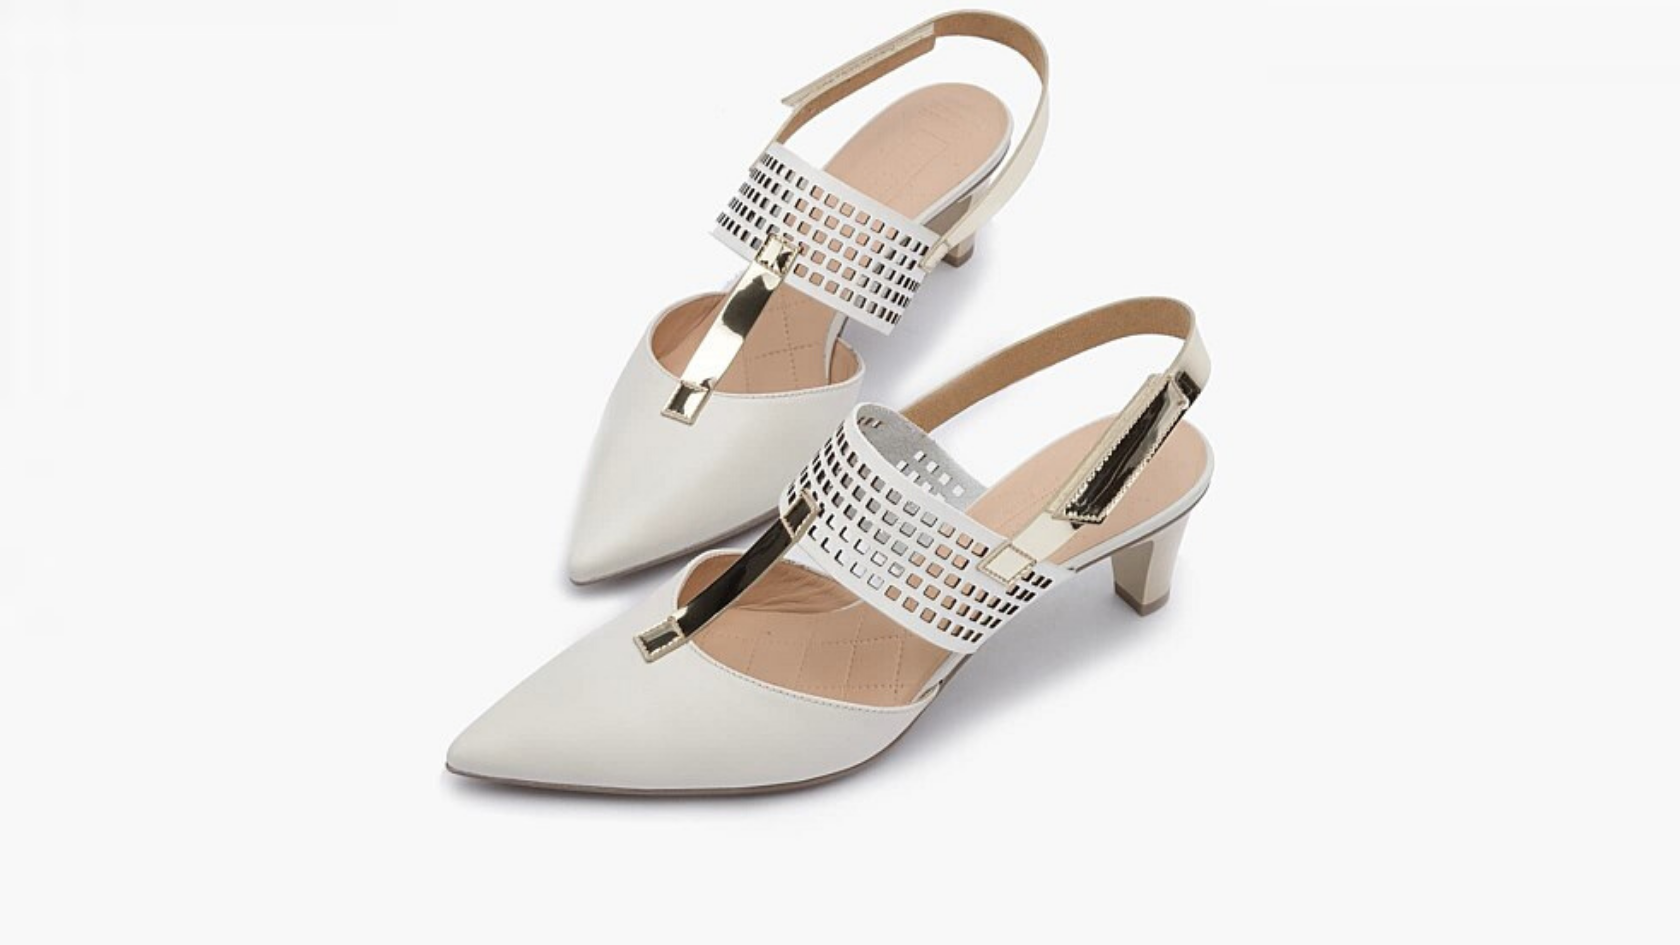 Pair of white pointed toe heels with golden metallic finishings against a neutral background.